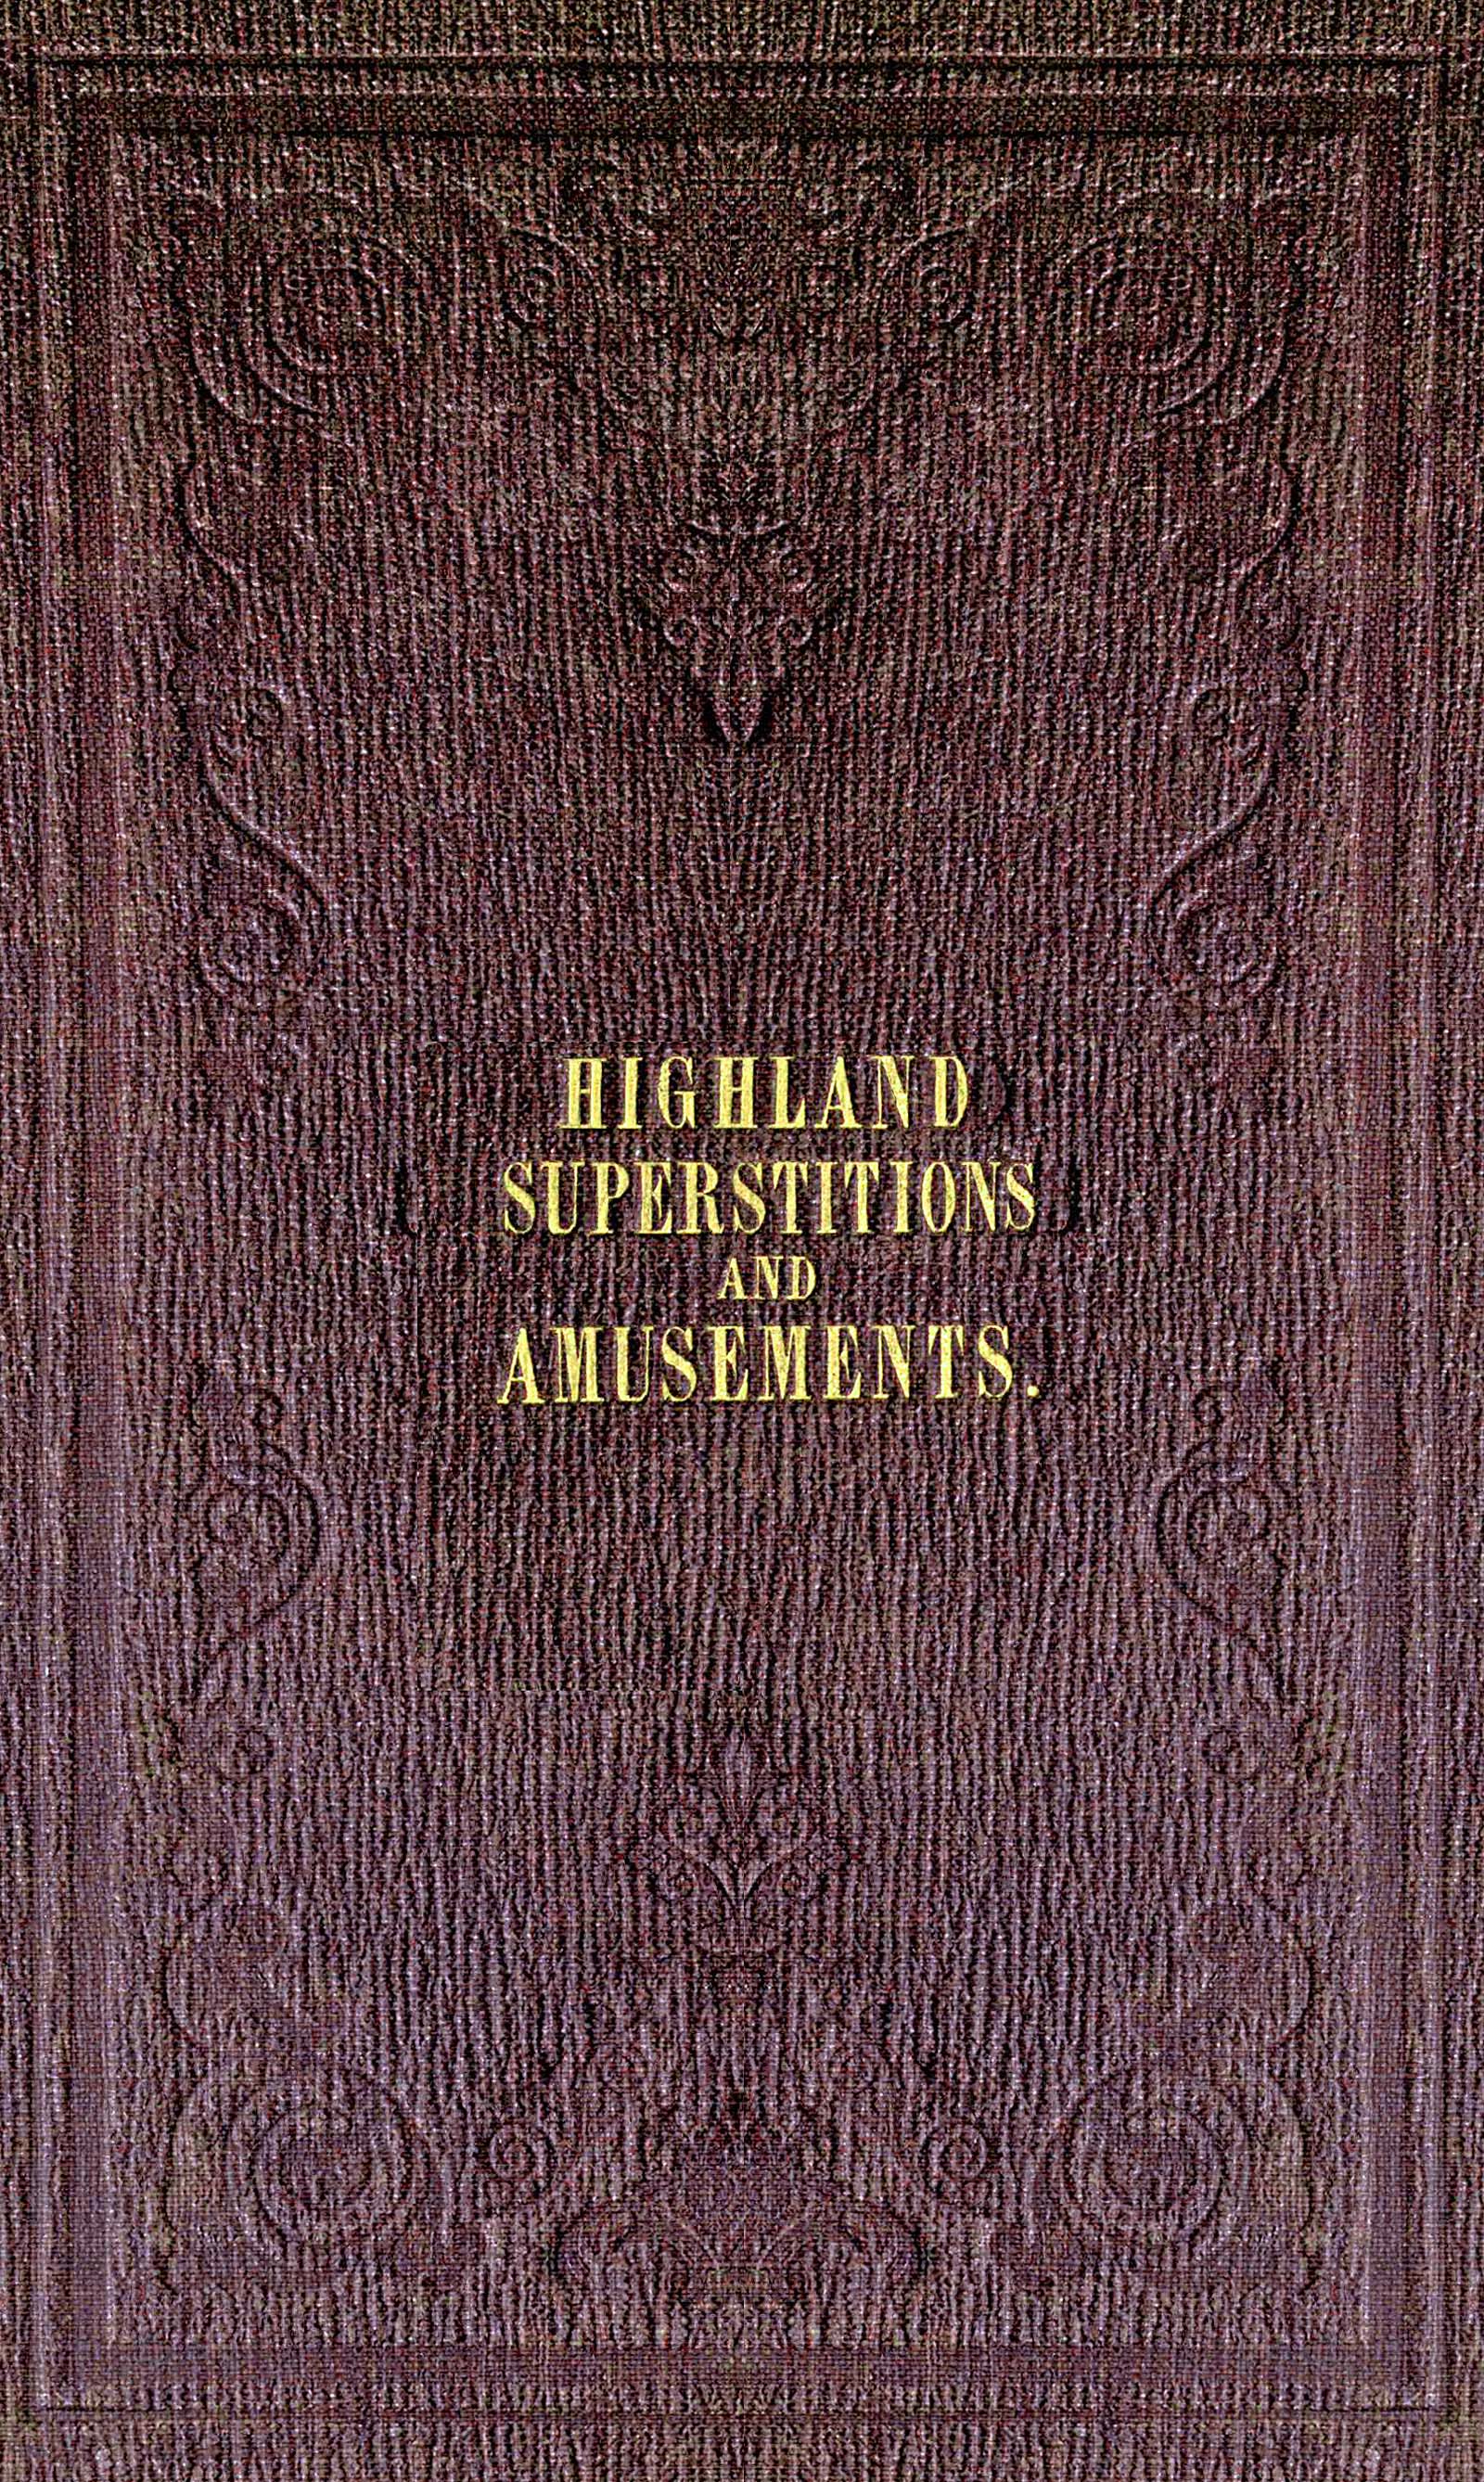 The popular superstitions and festive amusements of the Highlanders of Scotland, by William Grant Stewart—A Project Gutenberg eBook